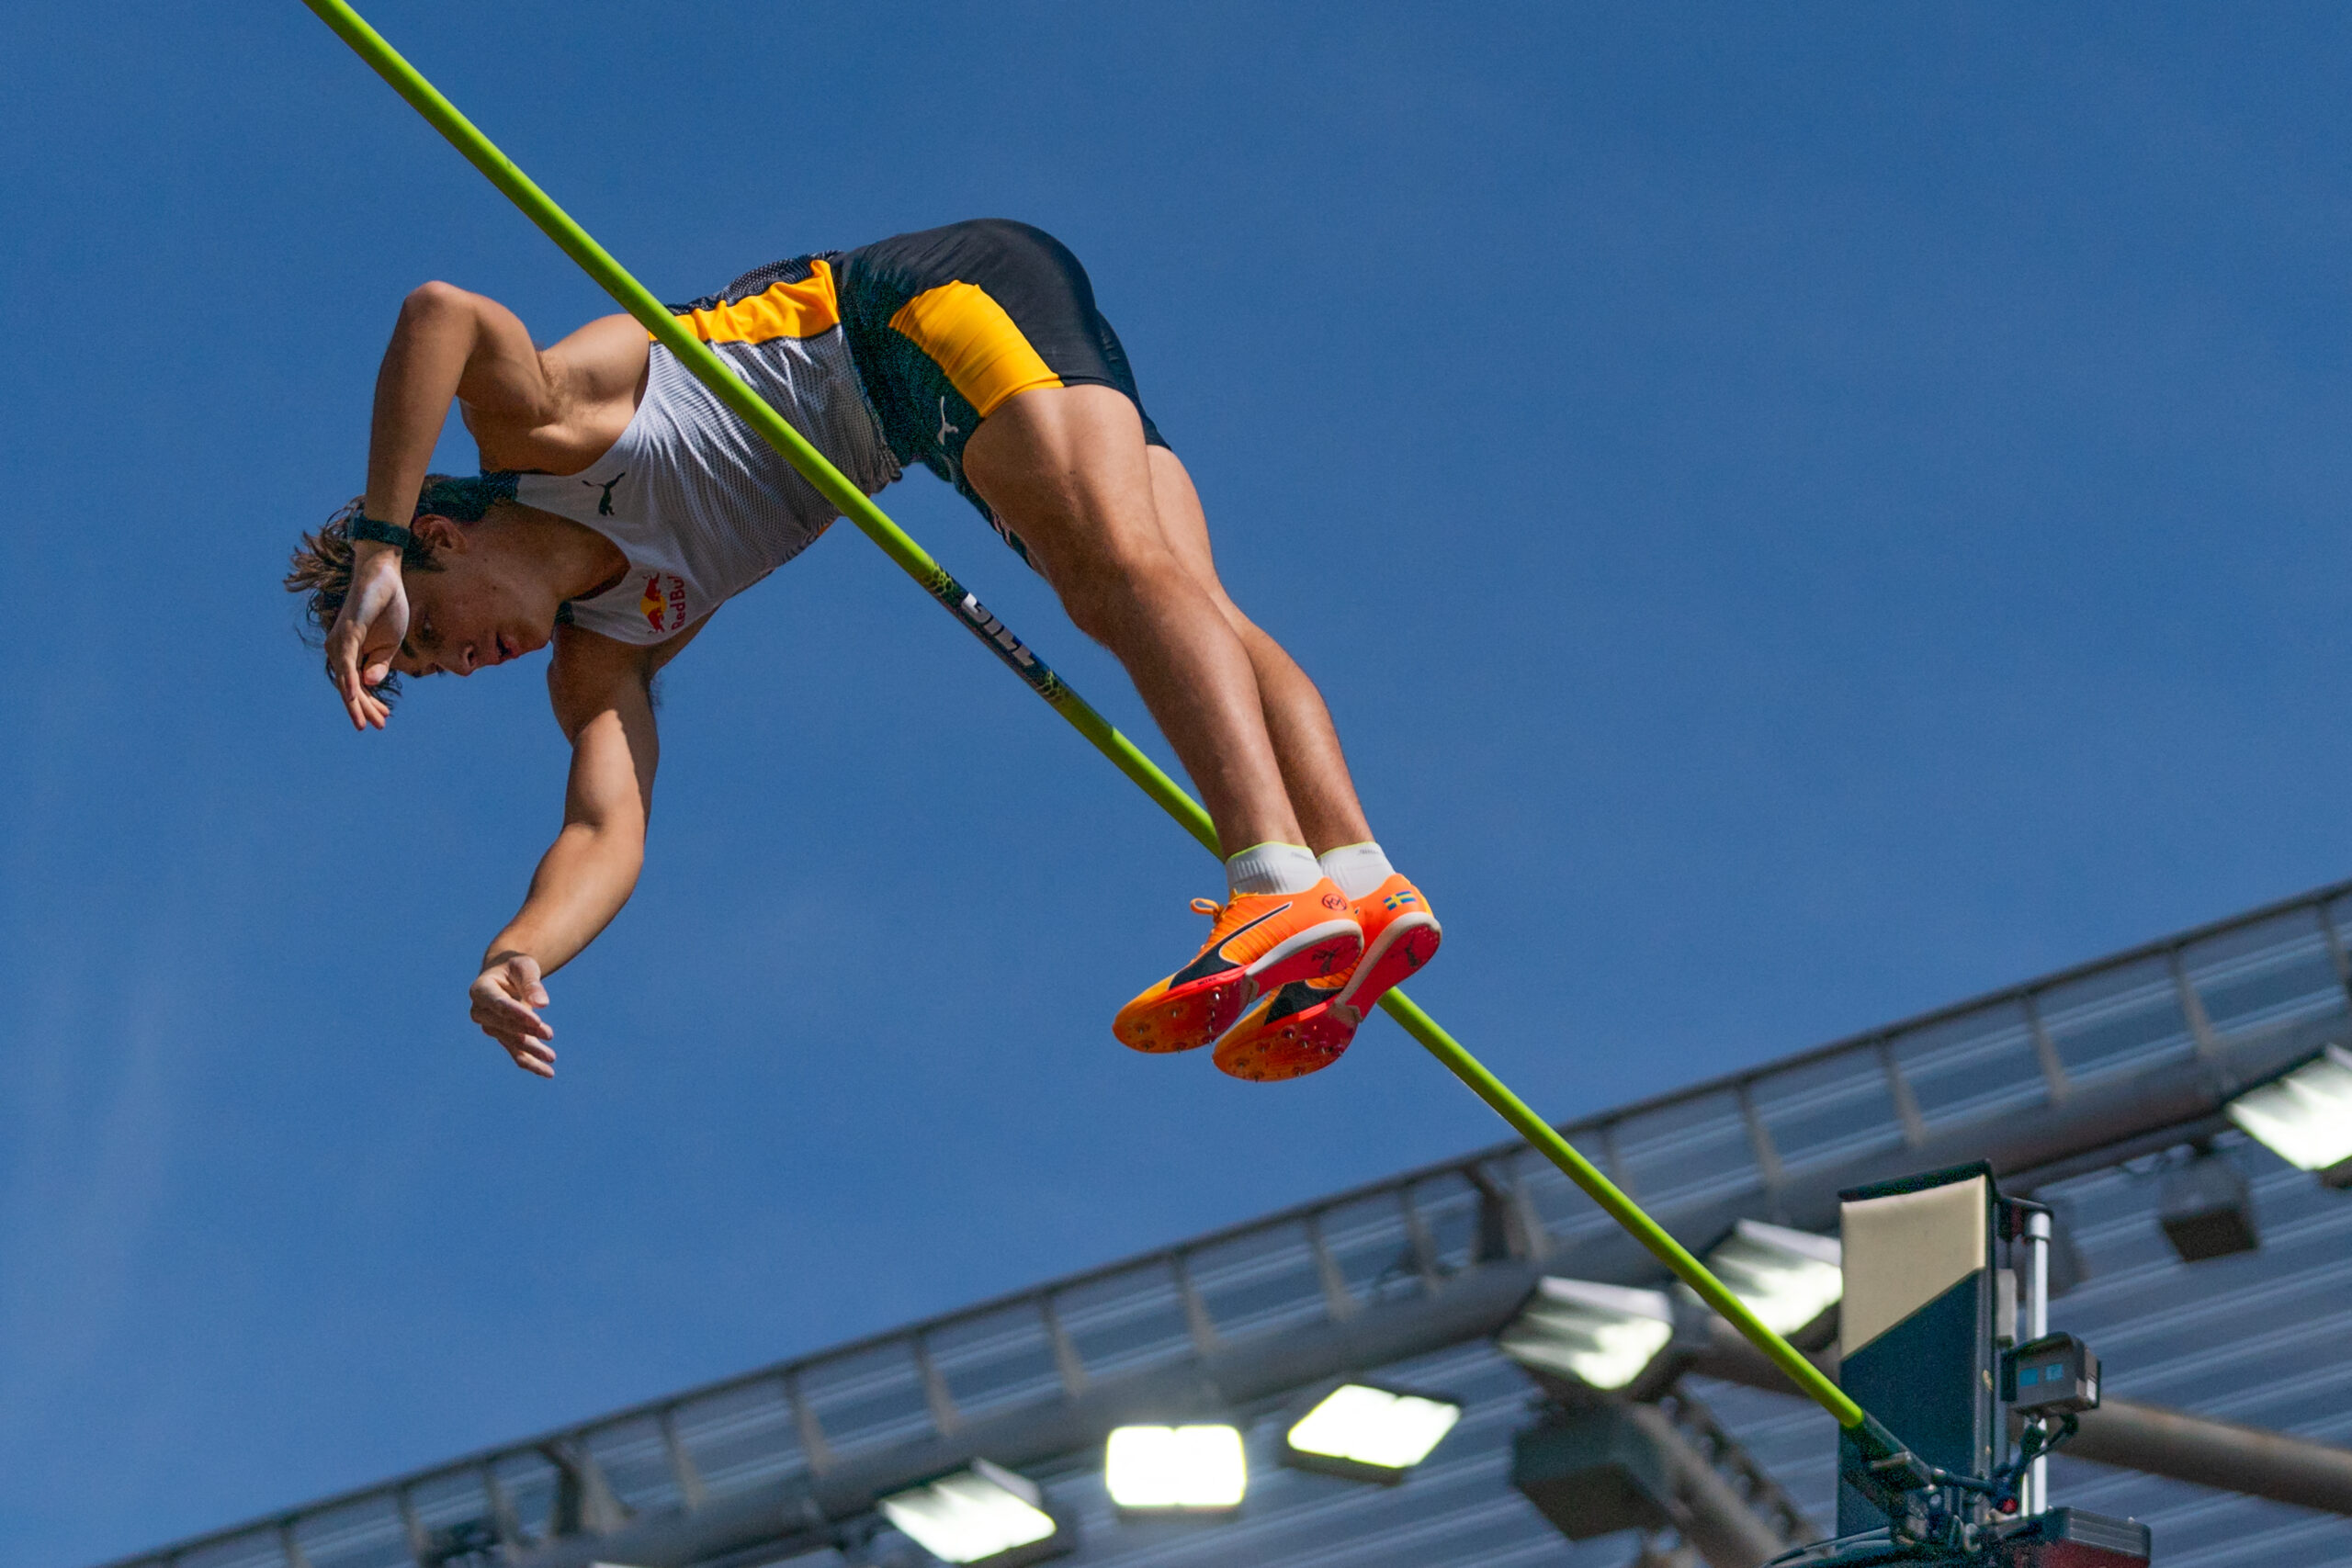  Armand Duplantis of Sweden competes in the Men's Pole Vault during the 2023 Prefontaine Classic and Wanda Diamond League Final at Hayward Field on September 17, 2023 in Eugene, Oregon. 